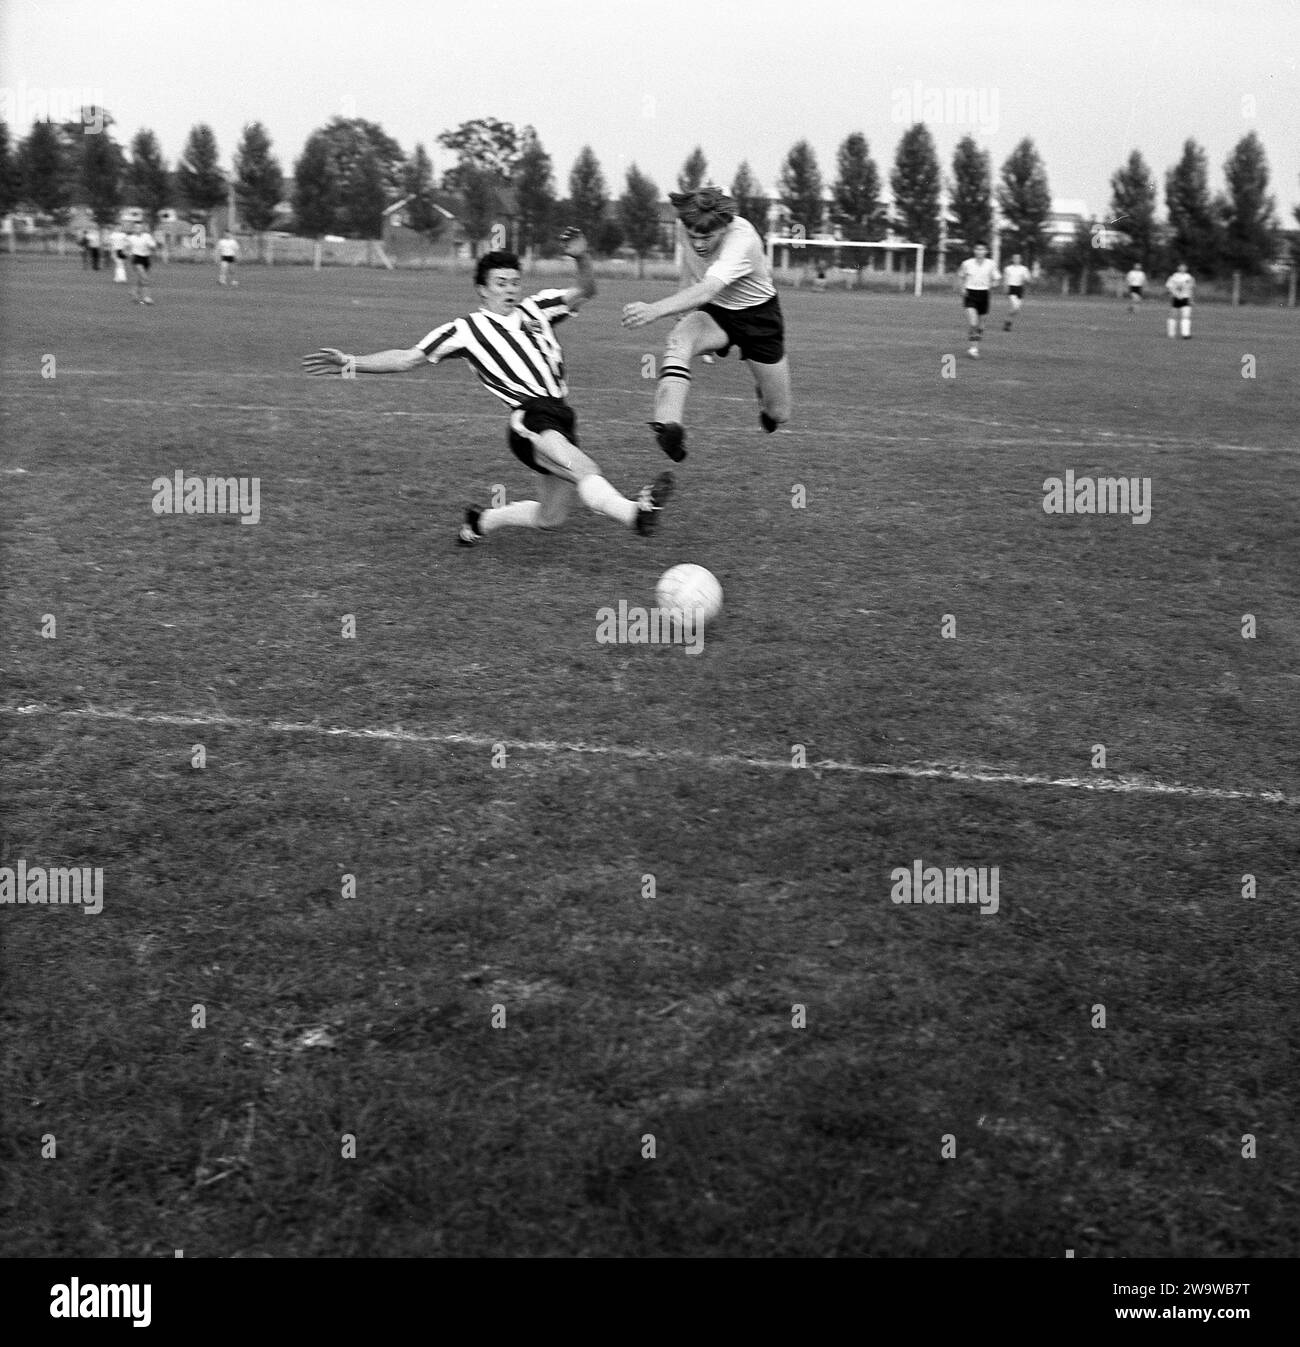 1964, August, football match between Hazells (Aylesbury) in striped kit and Rivets, Victoria Park Sports Ground, Aylesbury, England, UK. In this era, Hazells (Aylesbury) FC played in the Hellenic (premier) League. Stock Photo